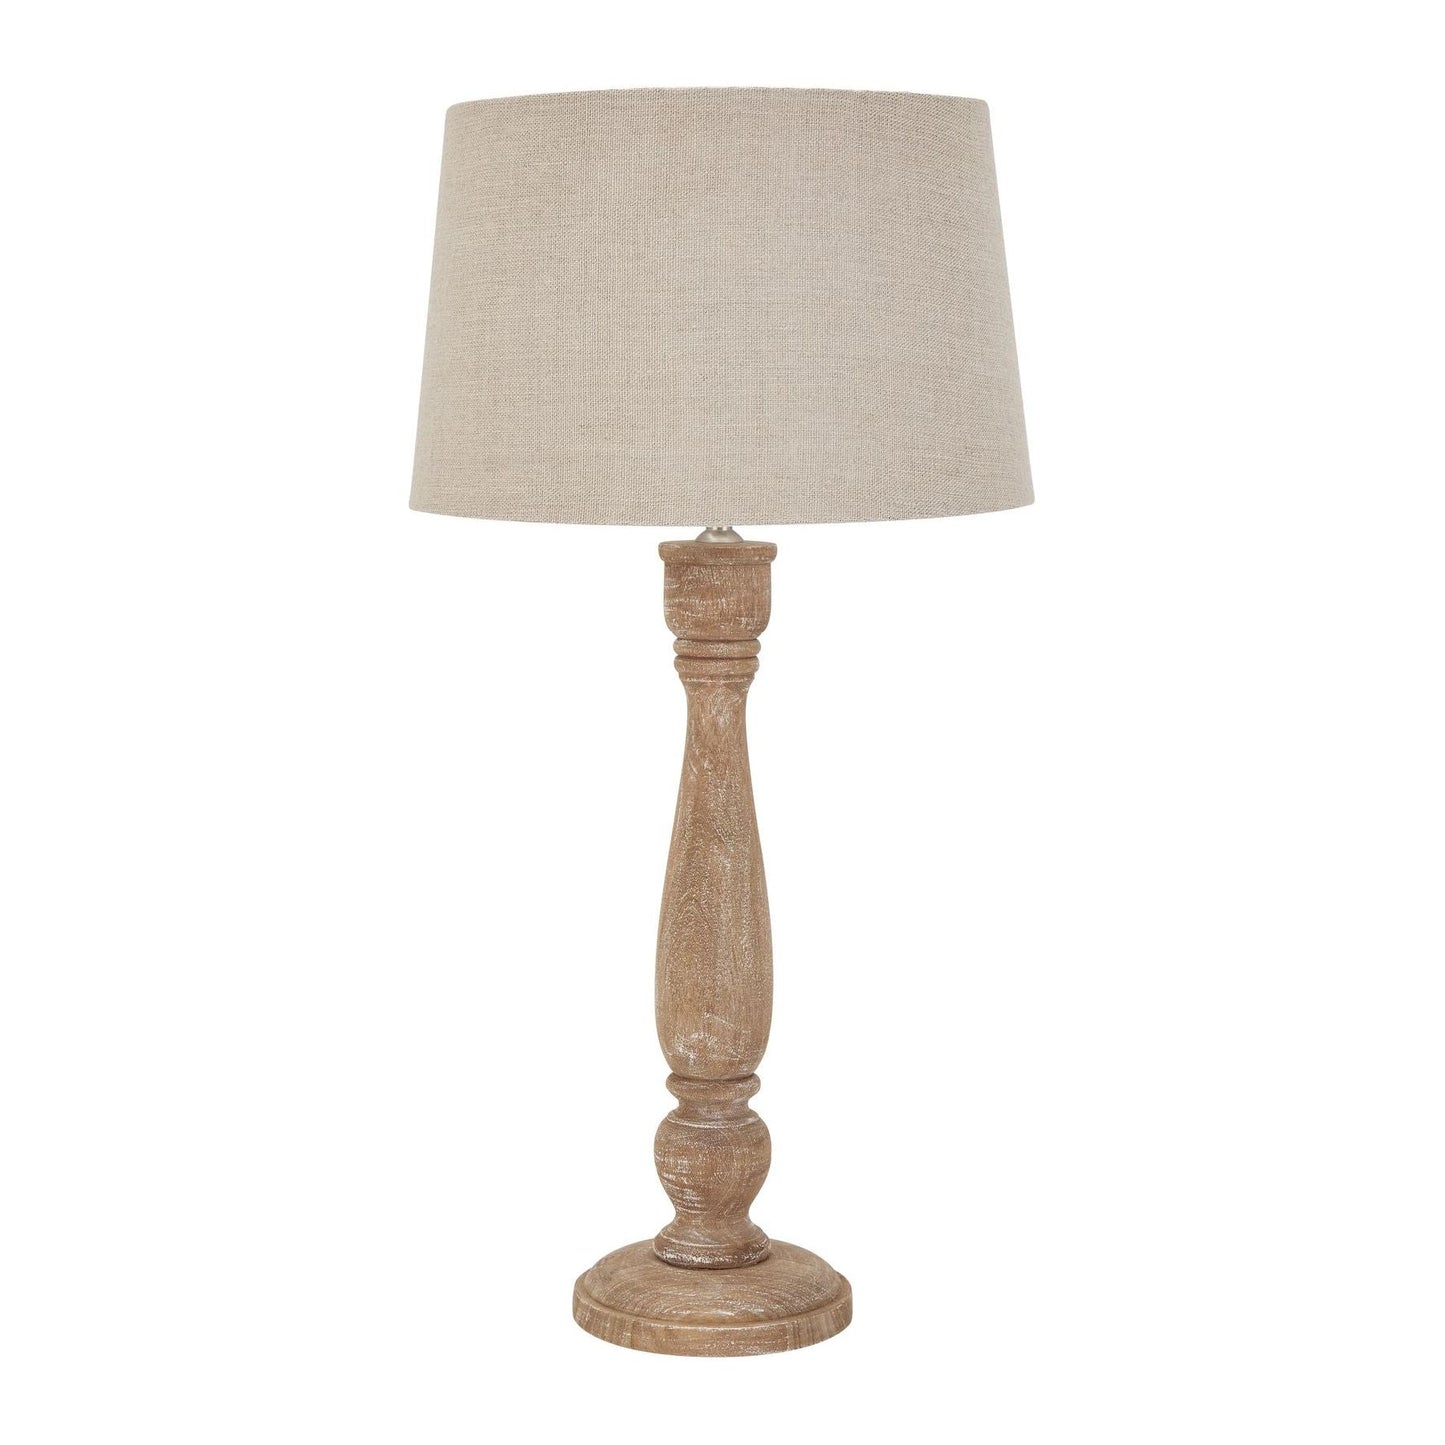 Delaney Natural Wash Candlestick Lamp With Linen Shade - Ashton and Finch